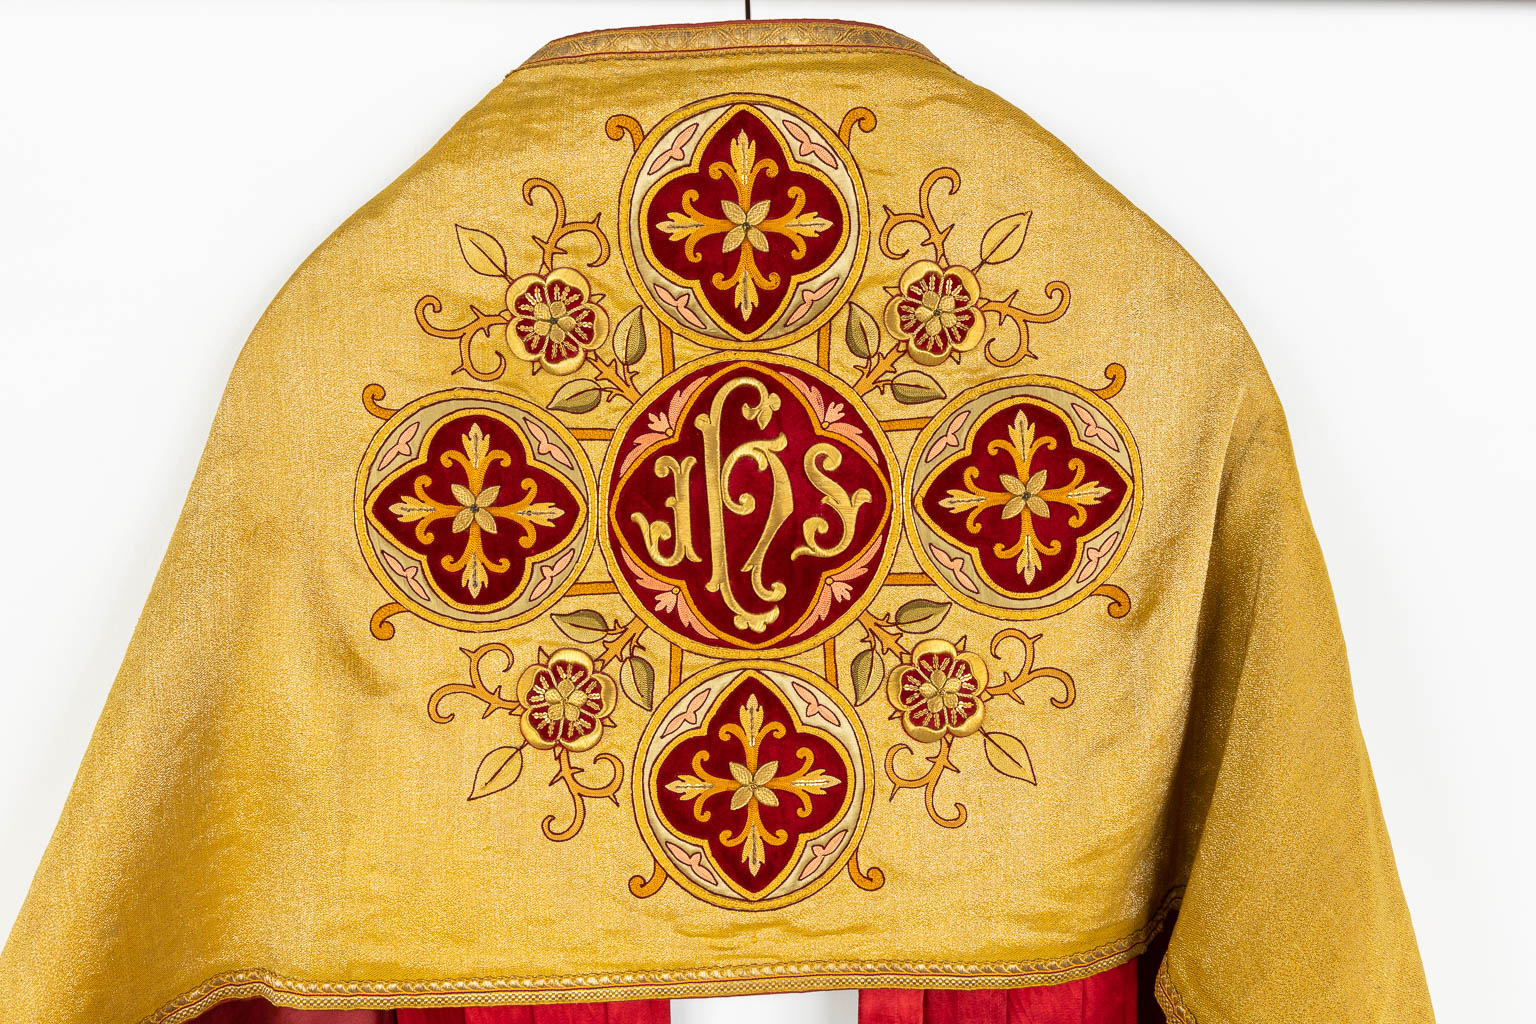 A cope, two humeral veils, a Roman Chasuble, finished with thick gold thread embroideries.